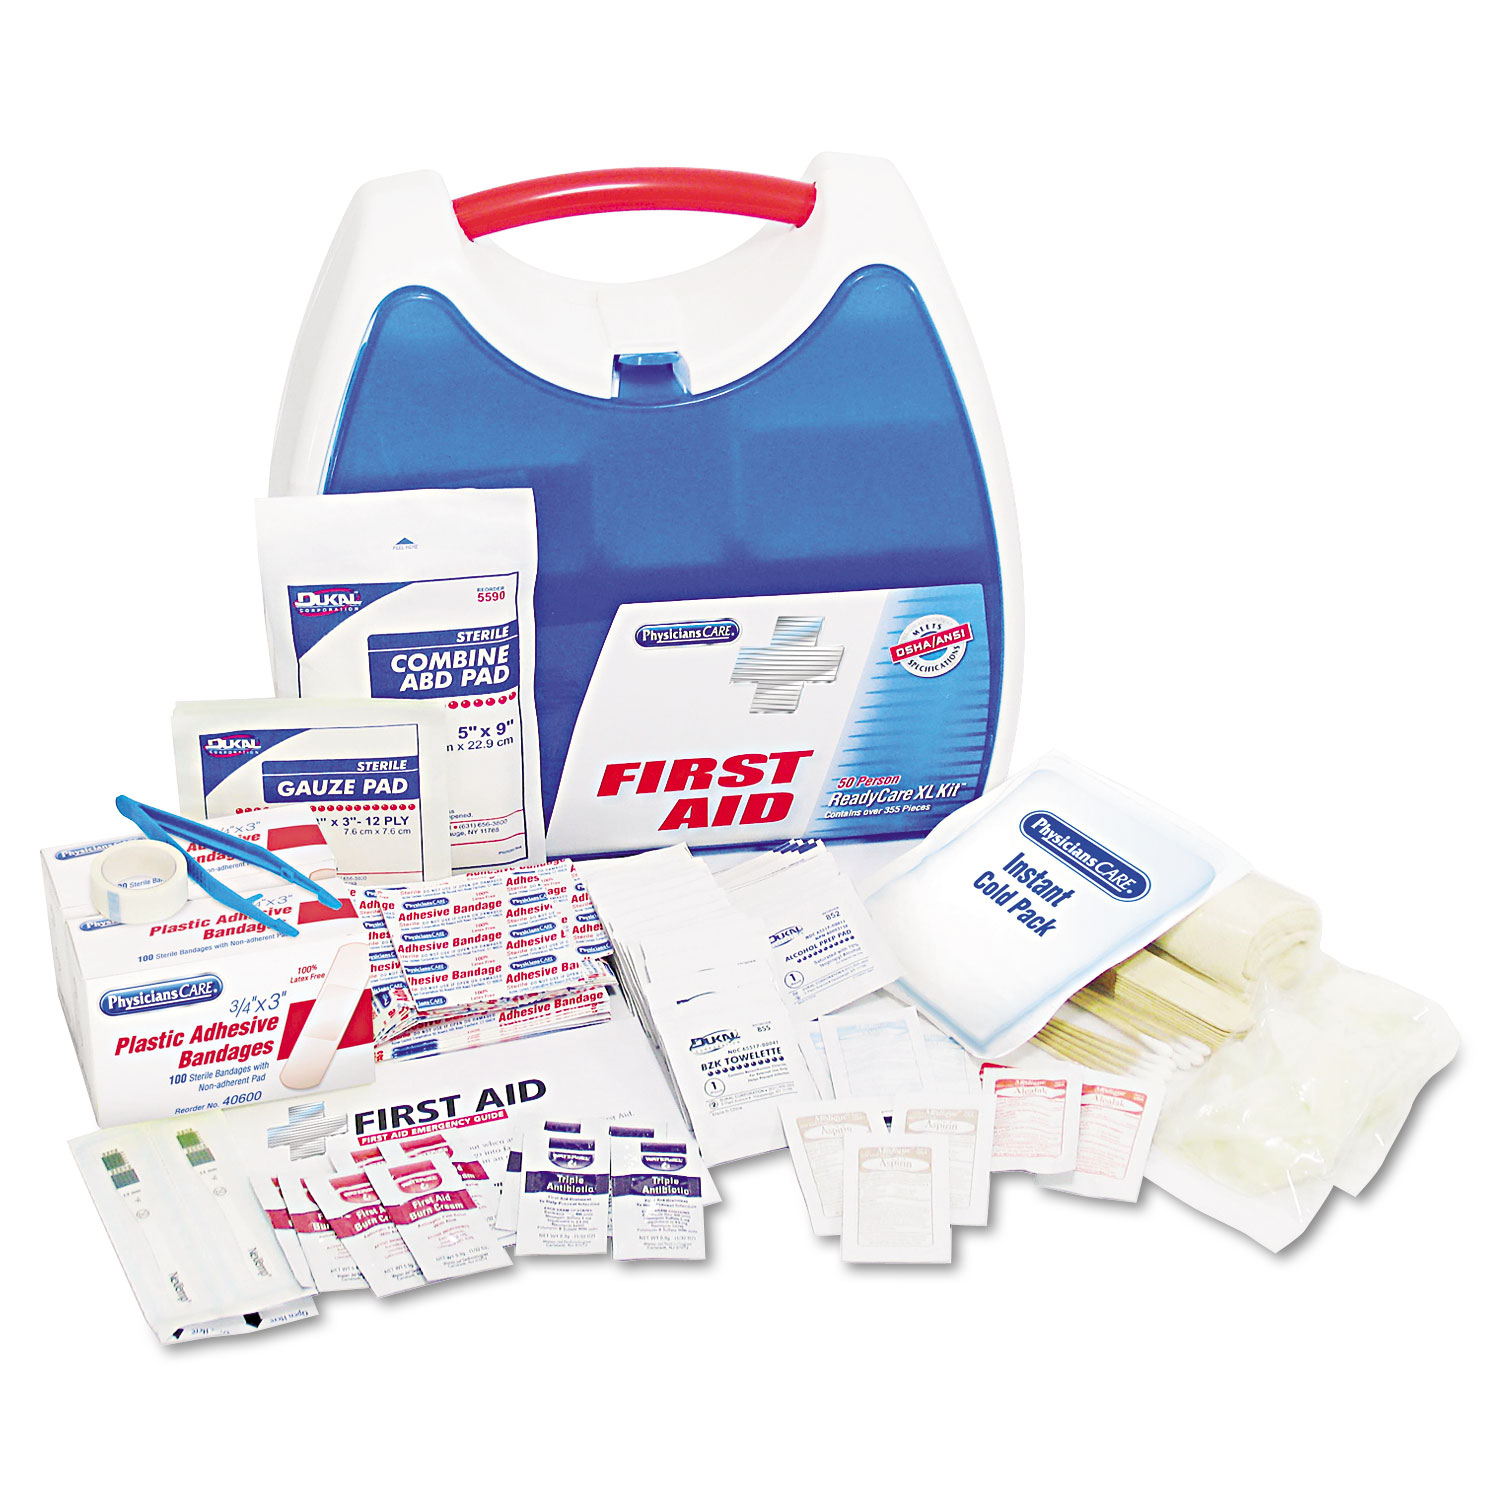 Physicianscare ReadyCare First Aid Kit for up to 50 People 355 Pieces/Kit 90698 - image 1 of 5